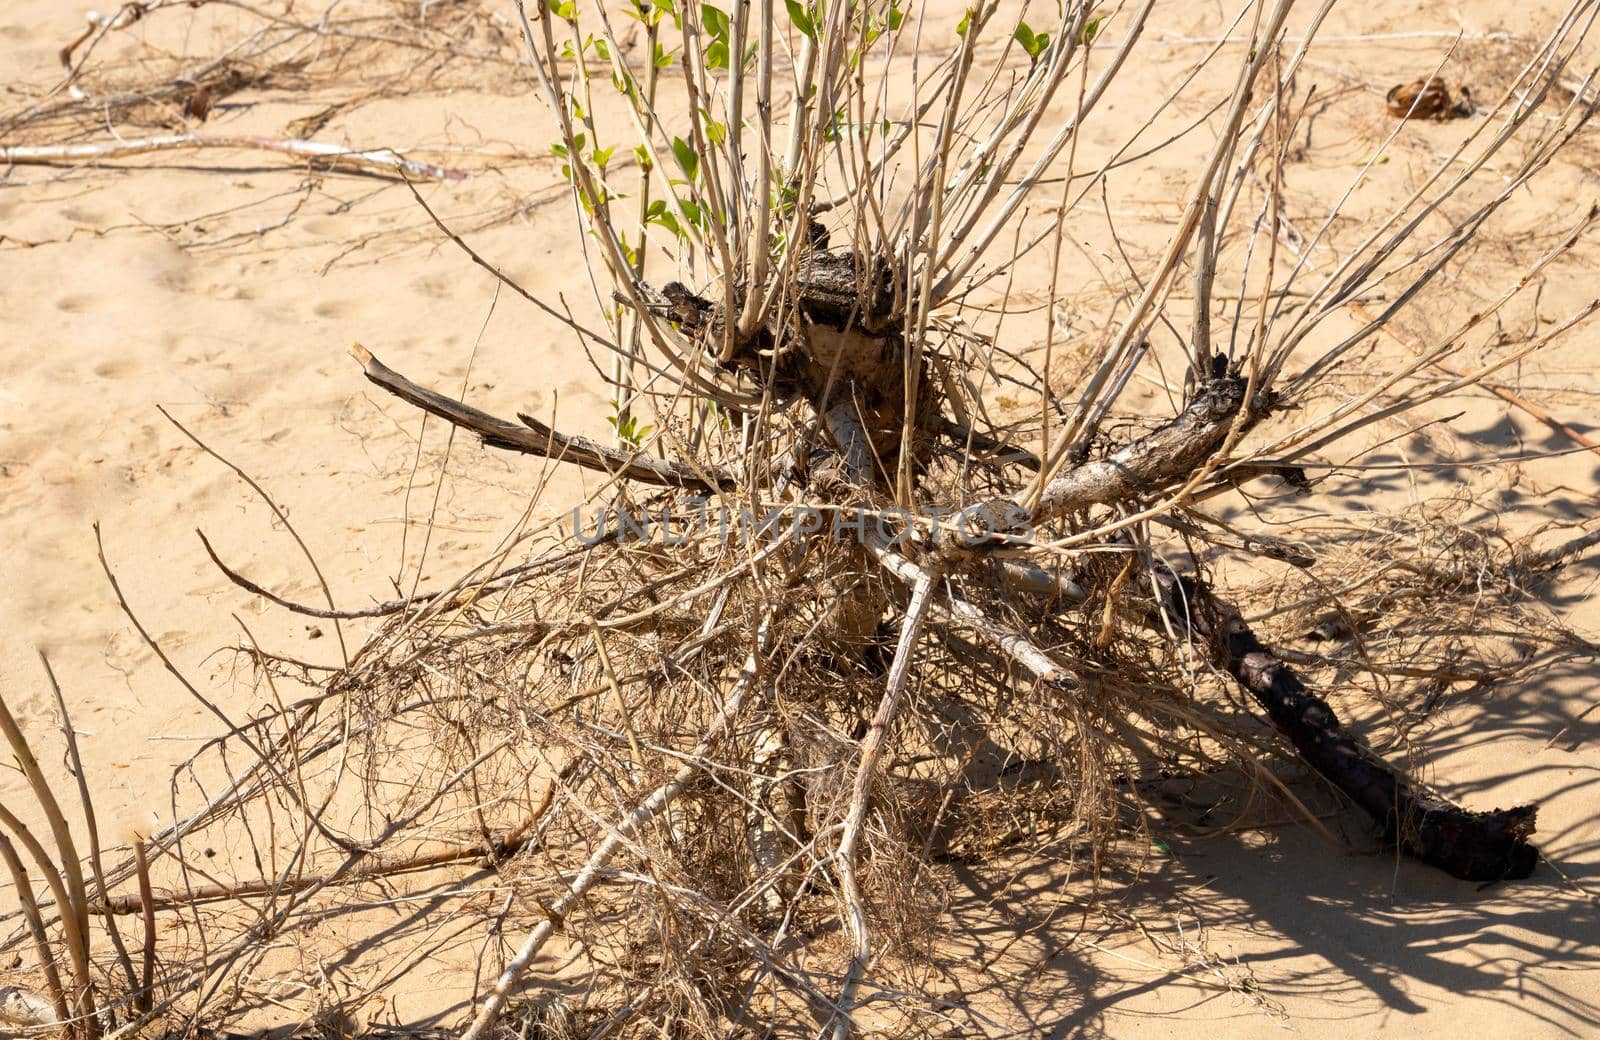 dry shrub grown in the depressed wild sand and drought of the desert by lapushka62